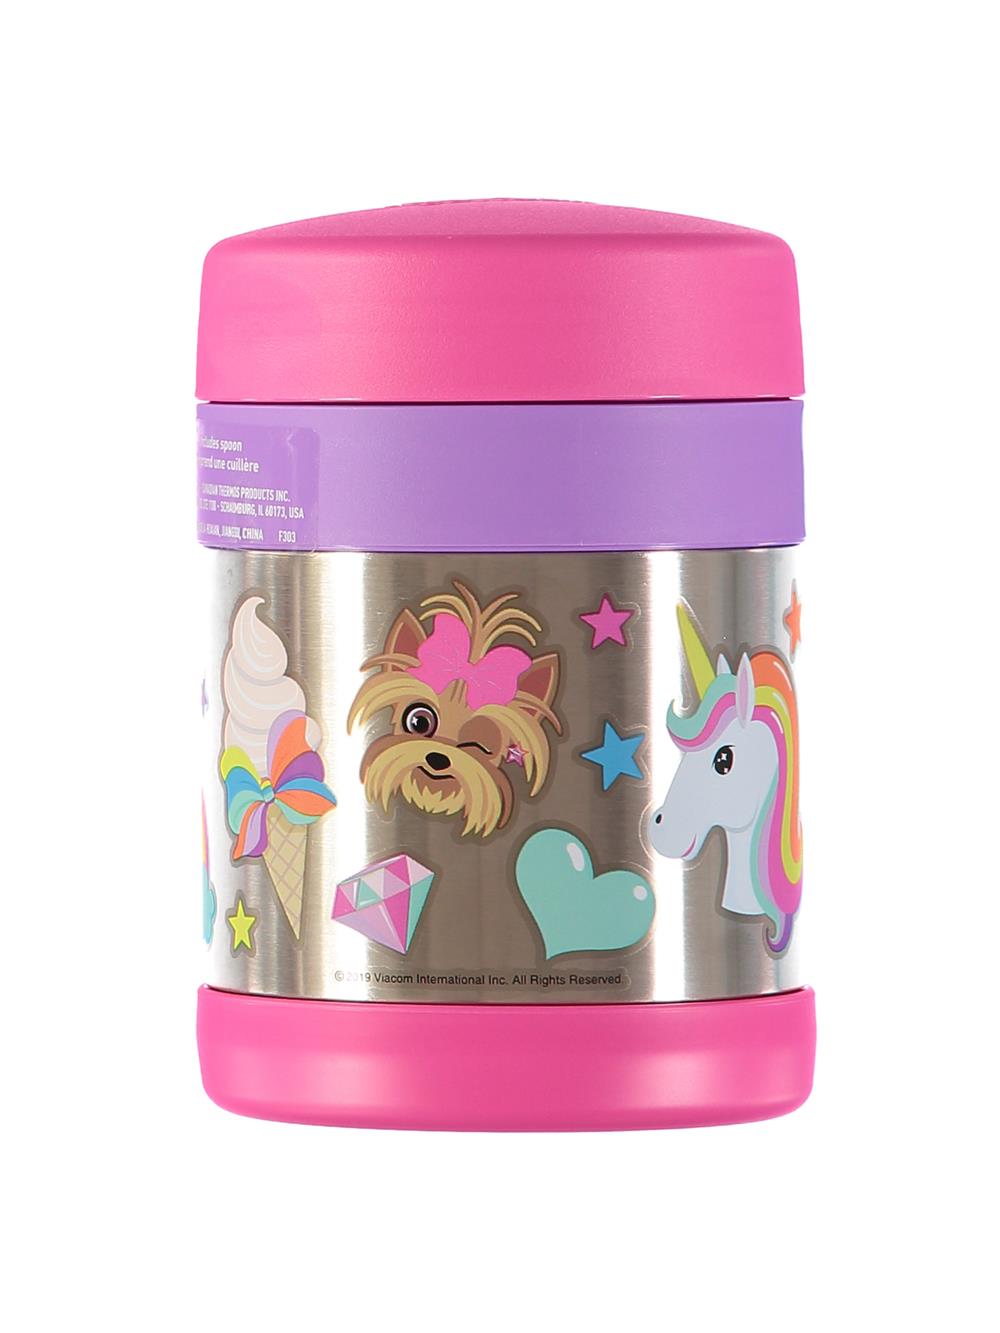 Thermos 10 oz FUNtainer Stainless Food Jar - Pink